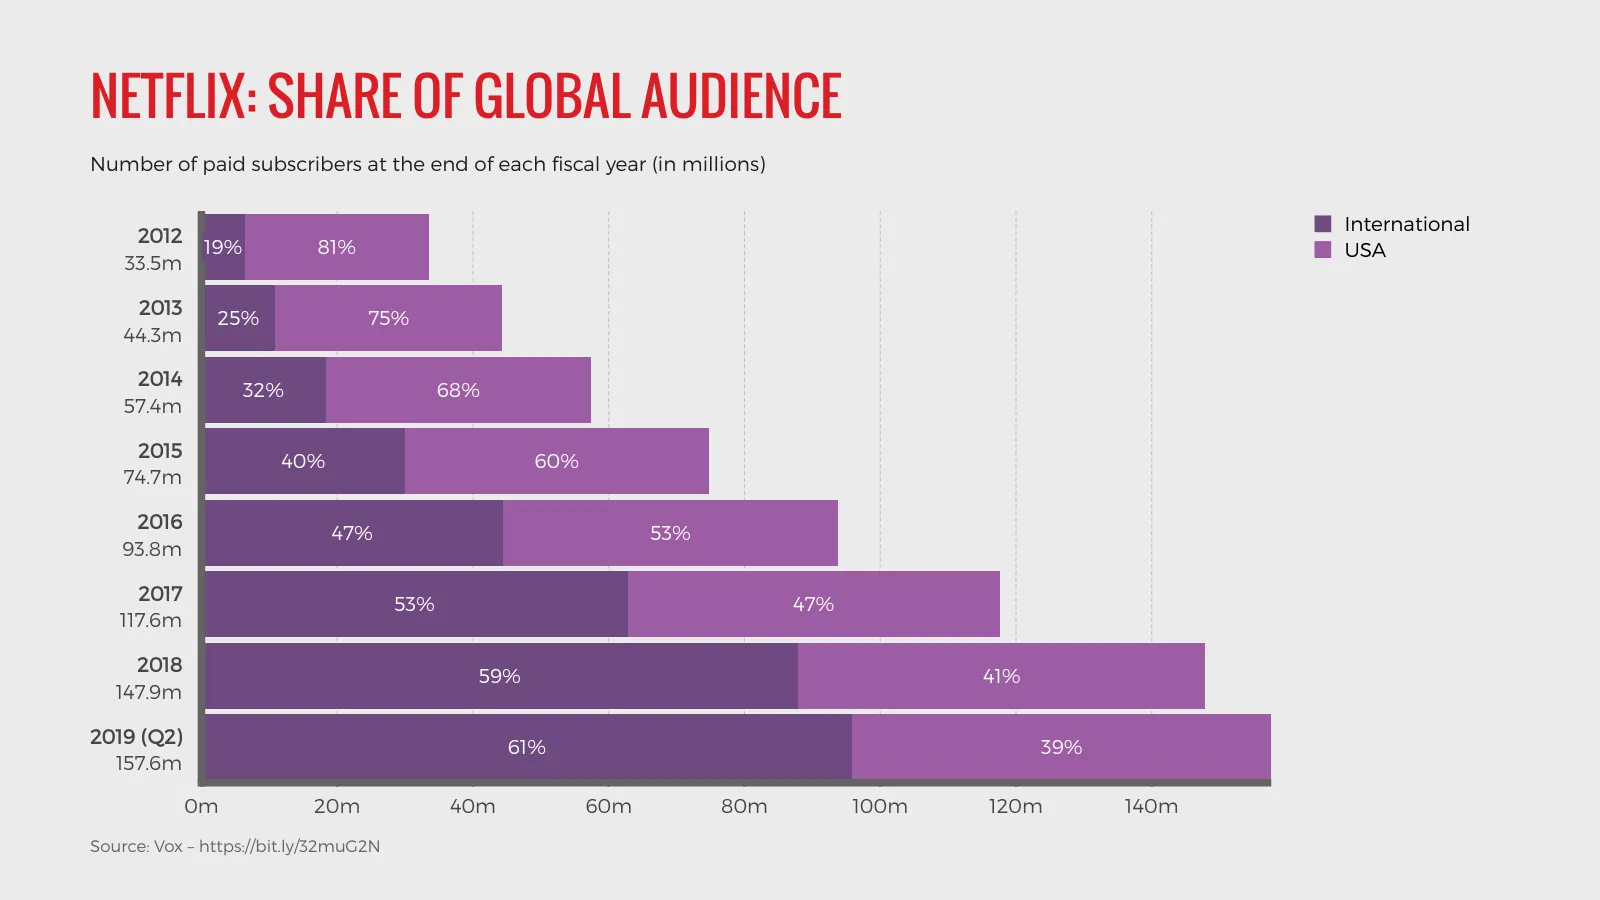 Stacked Bar Chart example: NETFLIX: SHARE OF GLOBAL AUDIENCE